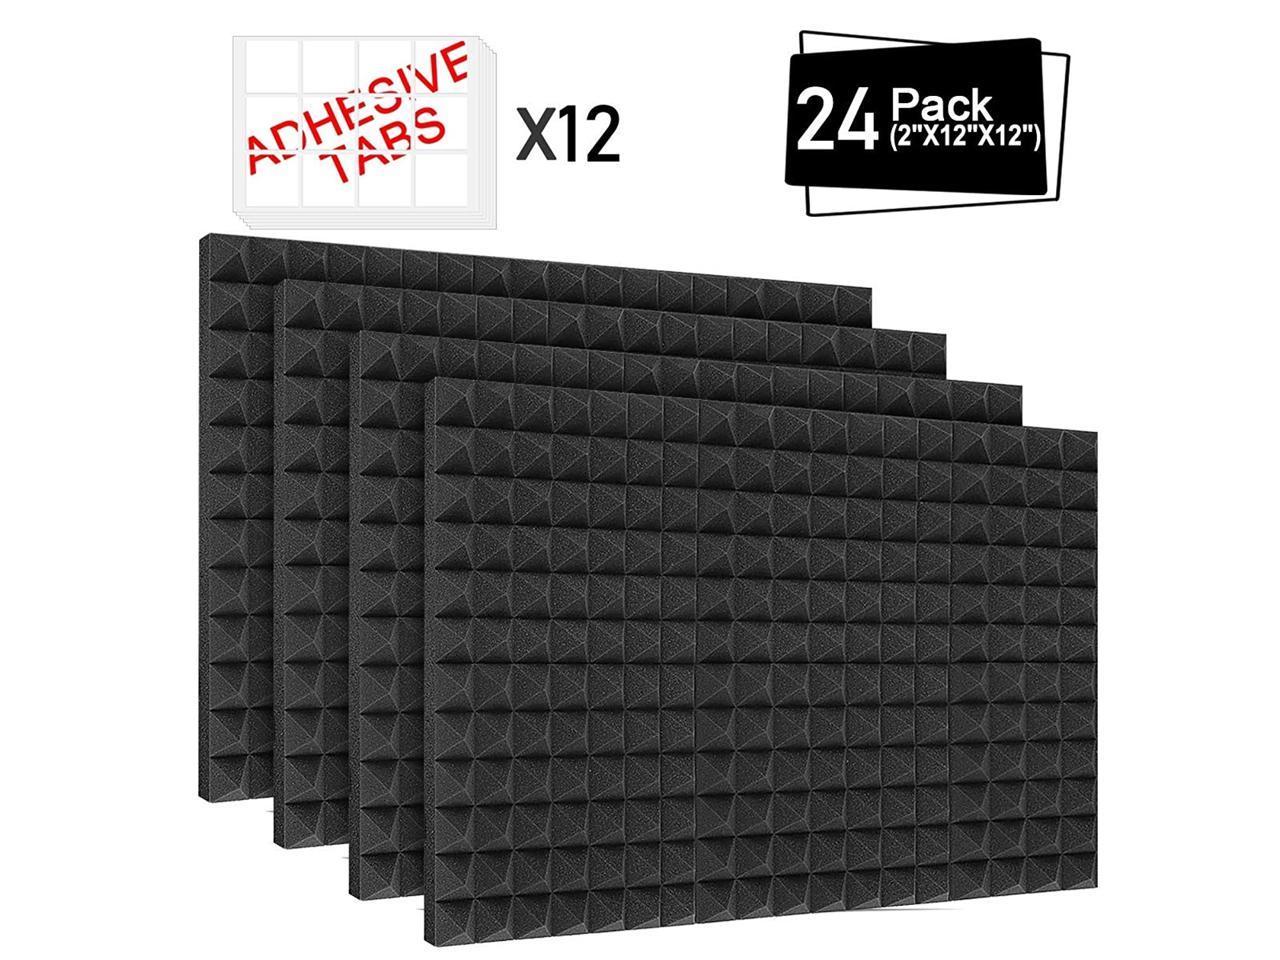 DEKIRU 24 Pack Sound Proof Padding White 12 X 12 X 0.4 Acoustic Panels Soundproofing Panels Sound Absorbing Panel High Density Beveled Edge Tiles Great for Wall Decoration and Acoustic Treatment 